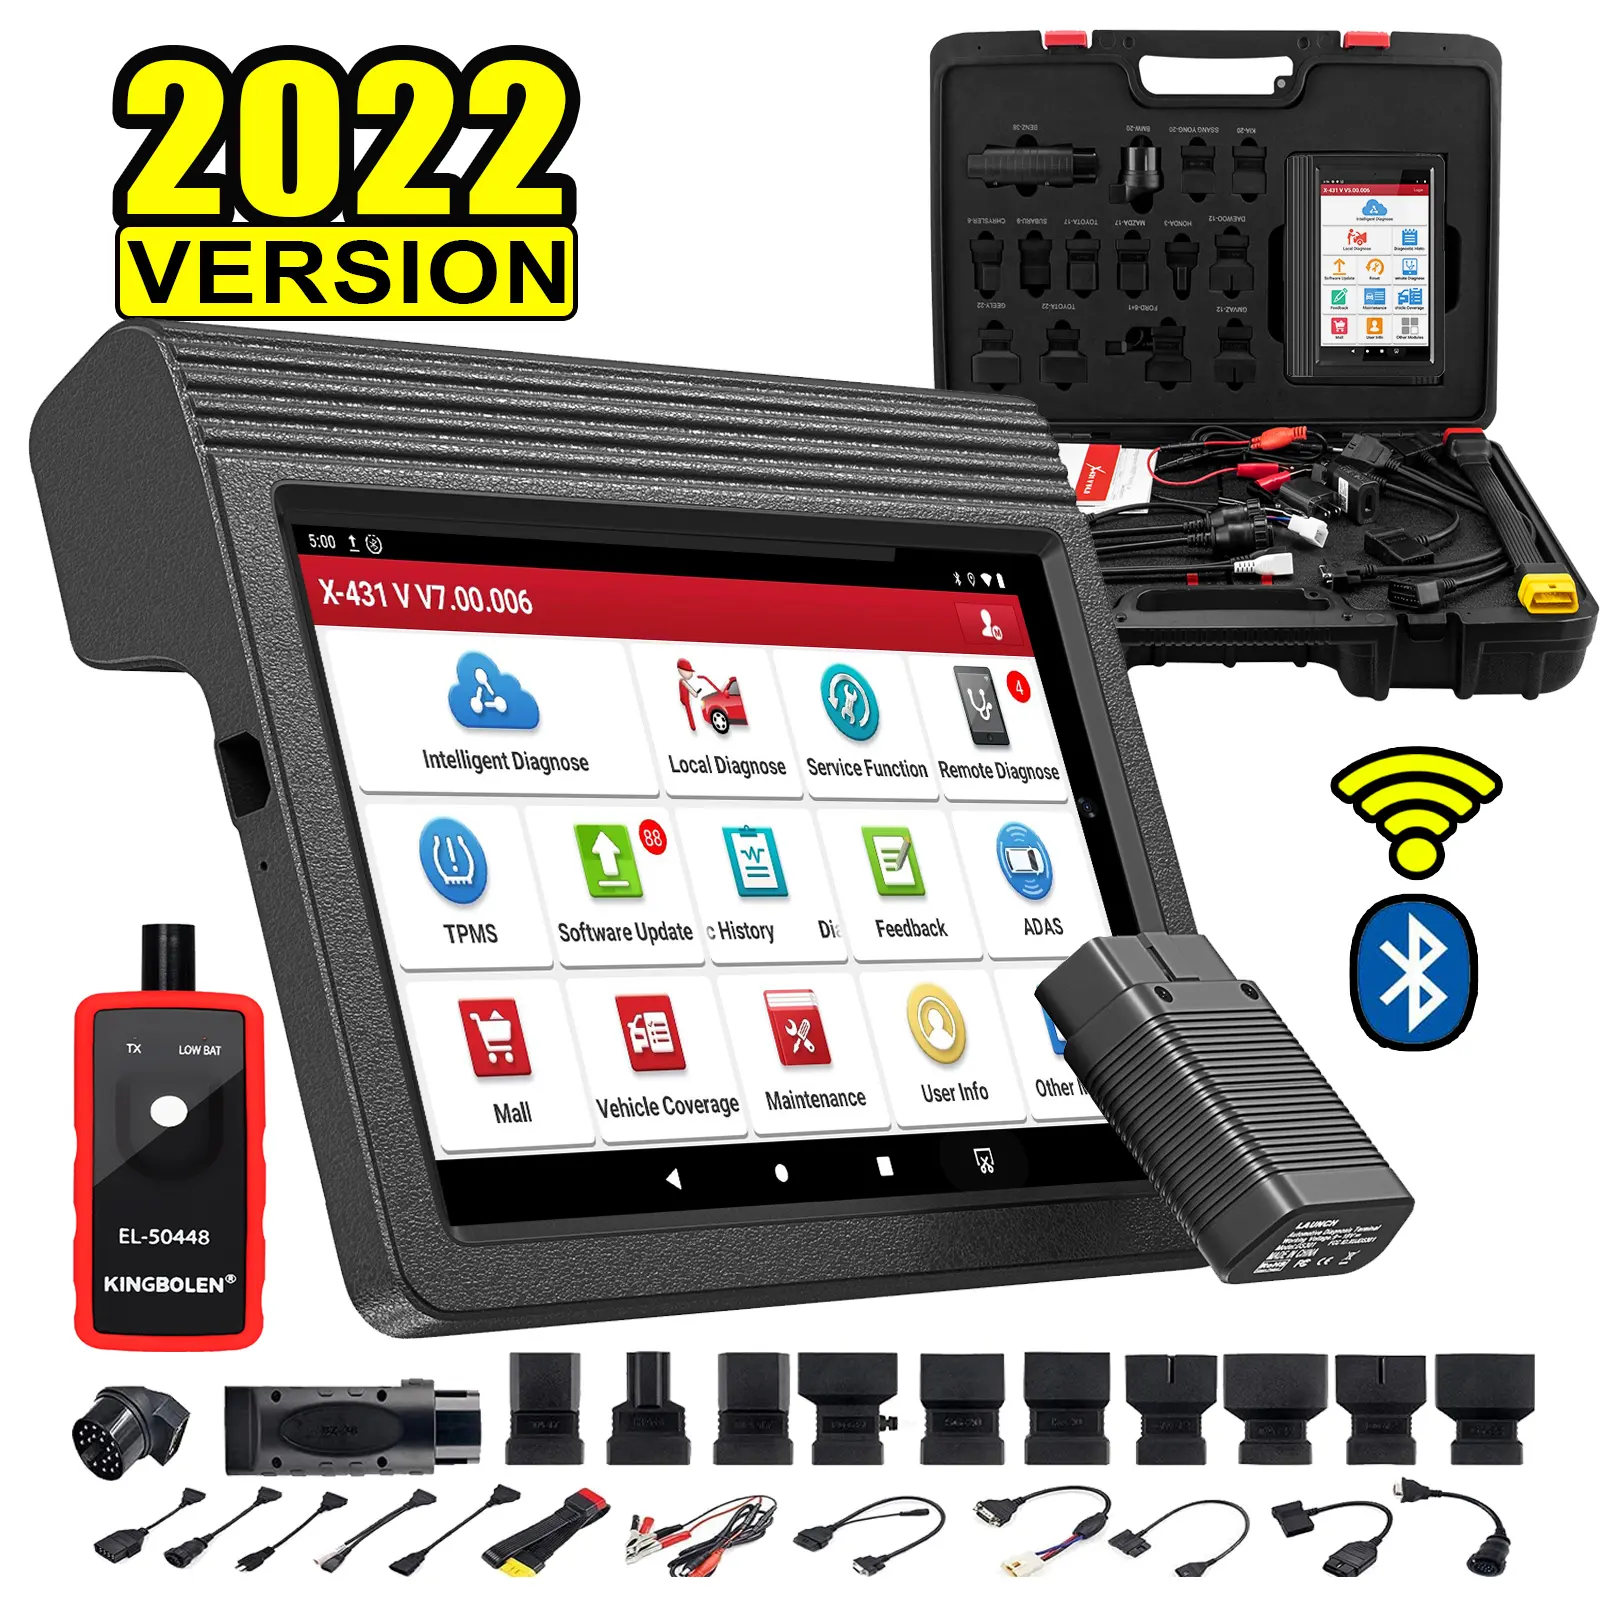 2022 Version Launch X-431 V 4.0 8" 12v Obdelevn Obd2 Scanner Tpms Automobile Car Diagnostic Machine Tool For 2 Years Free